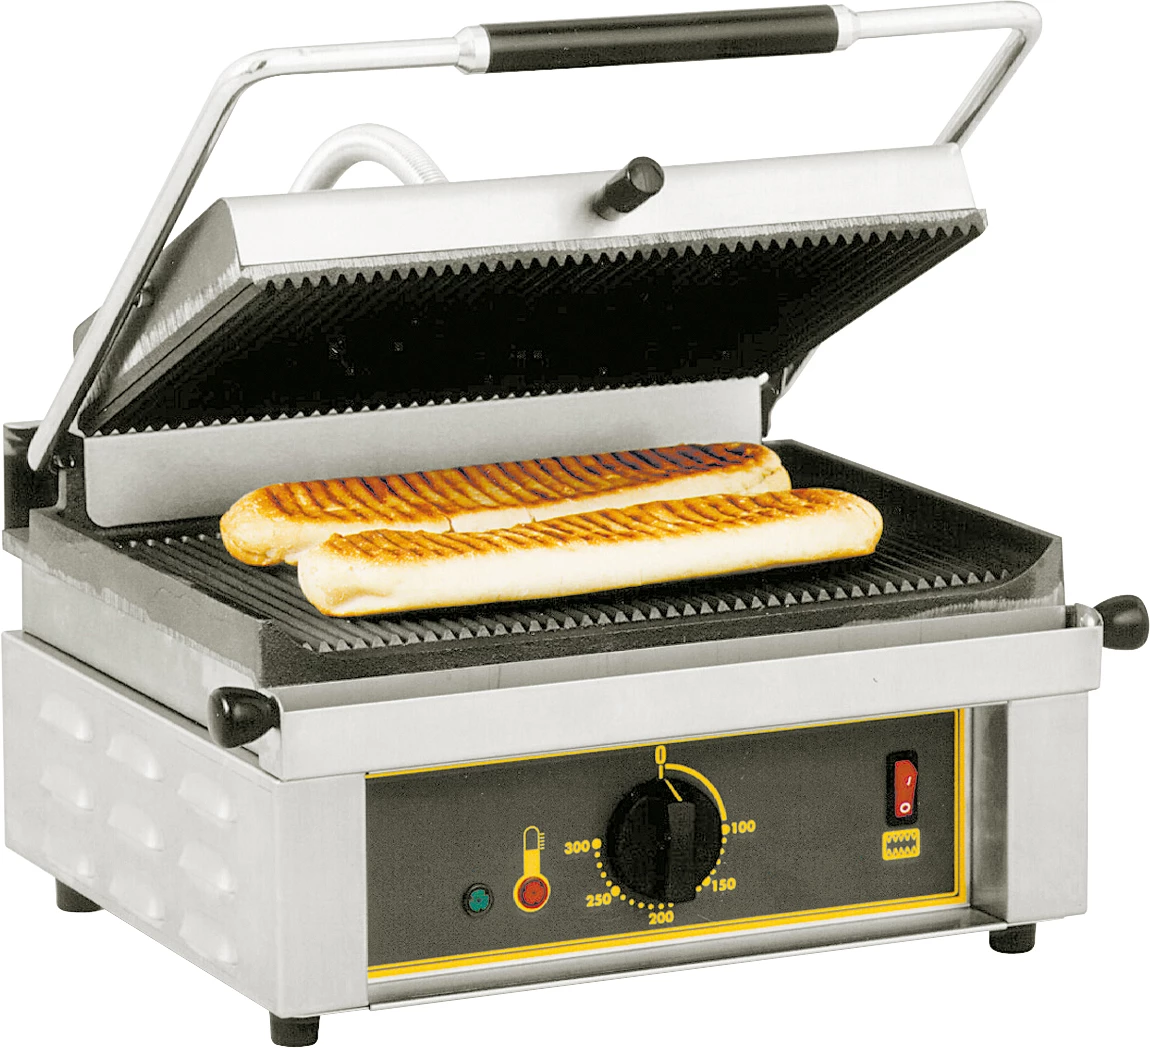 Roller Grill klemgrill (panini)